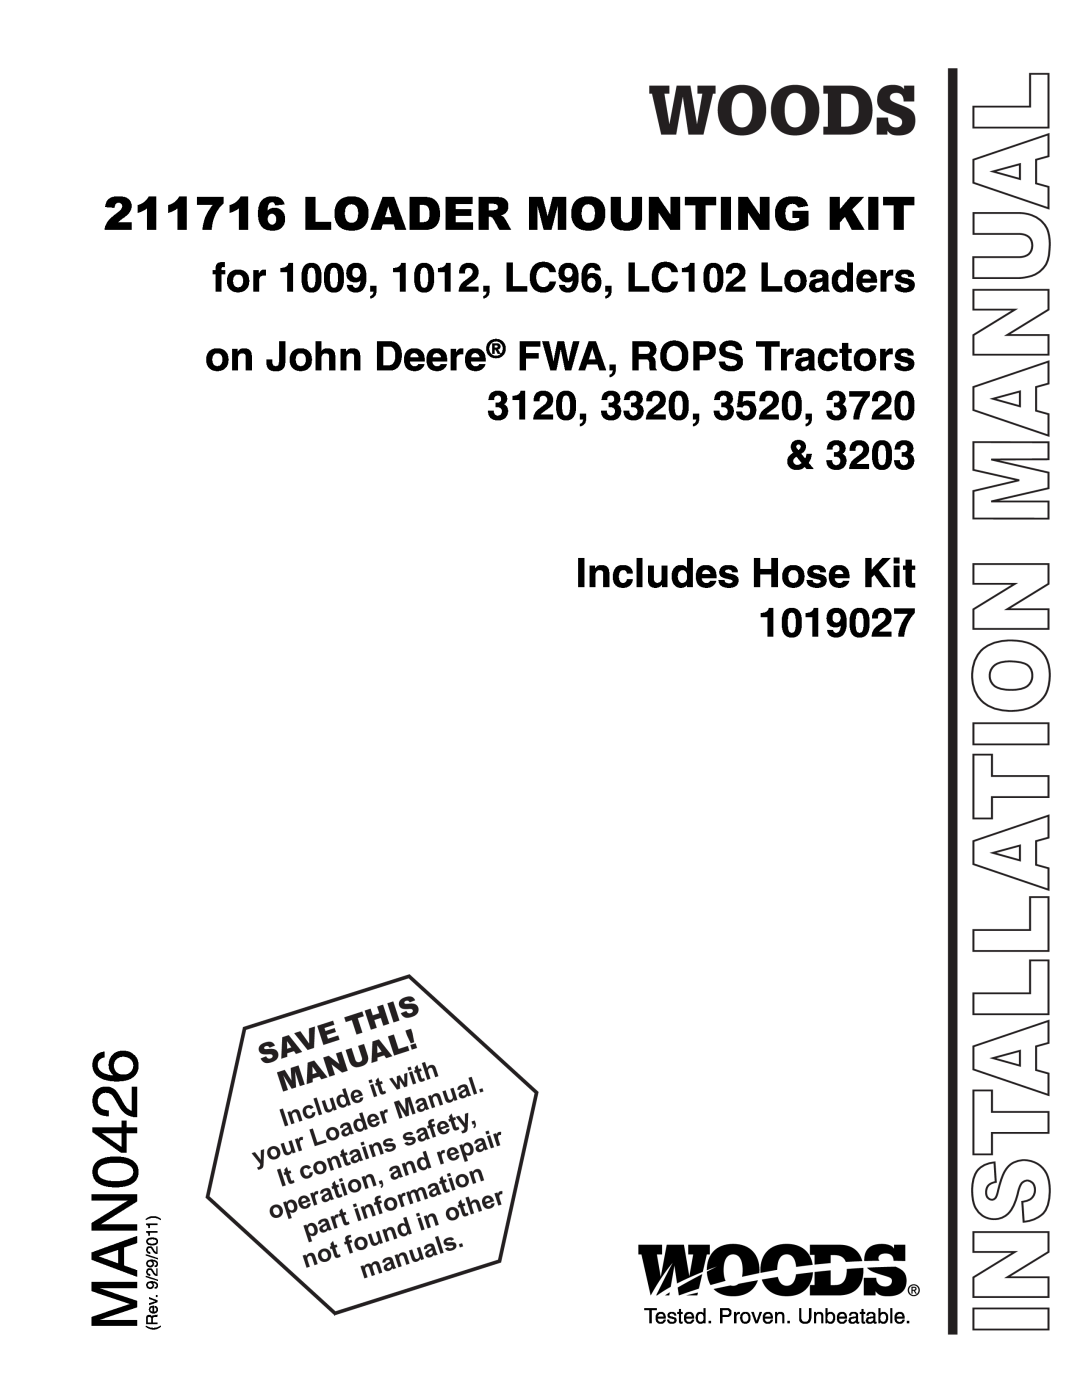 Woods Equipment 211716 installation manual MAN0426, Loader Mounting Kit, for 1009, 1012, LC96, LC102 Loaders, Save, This 